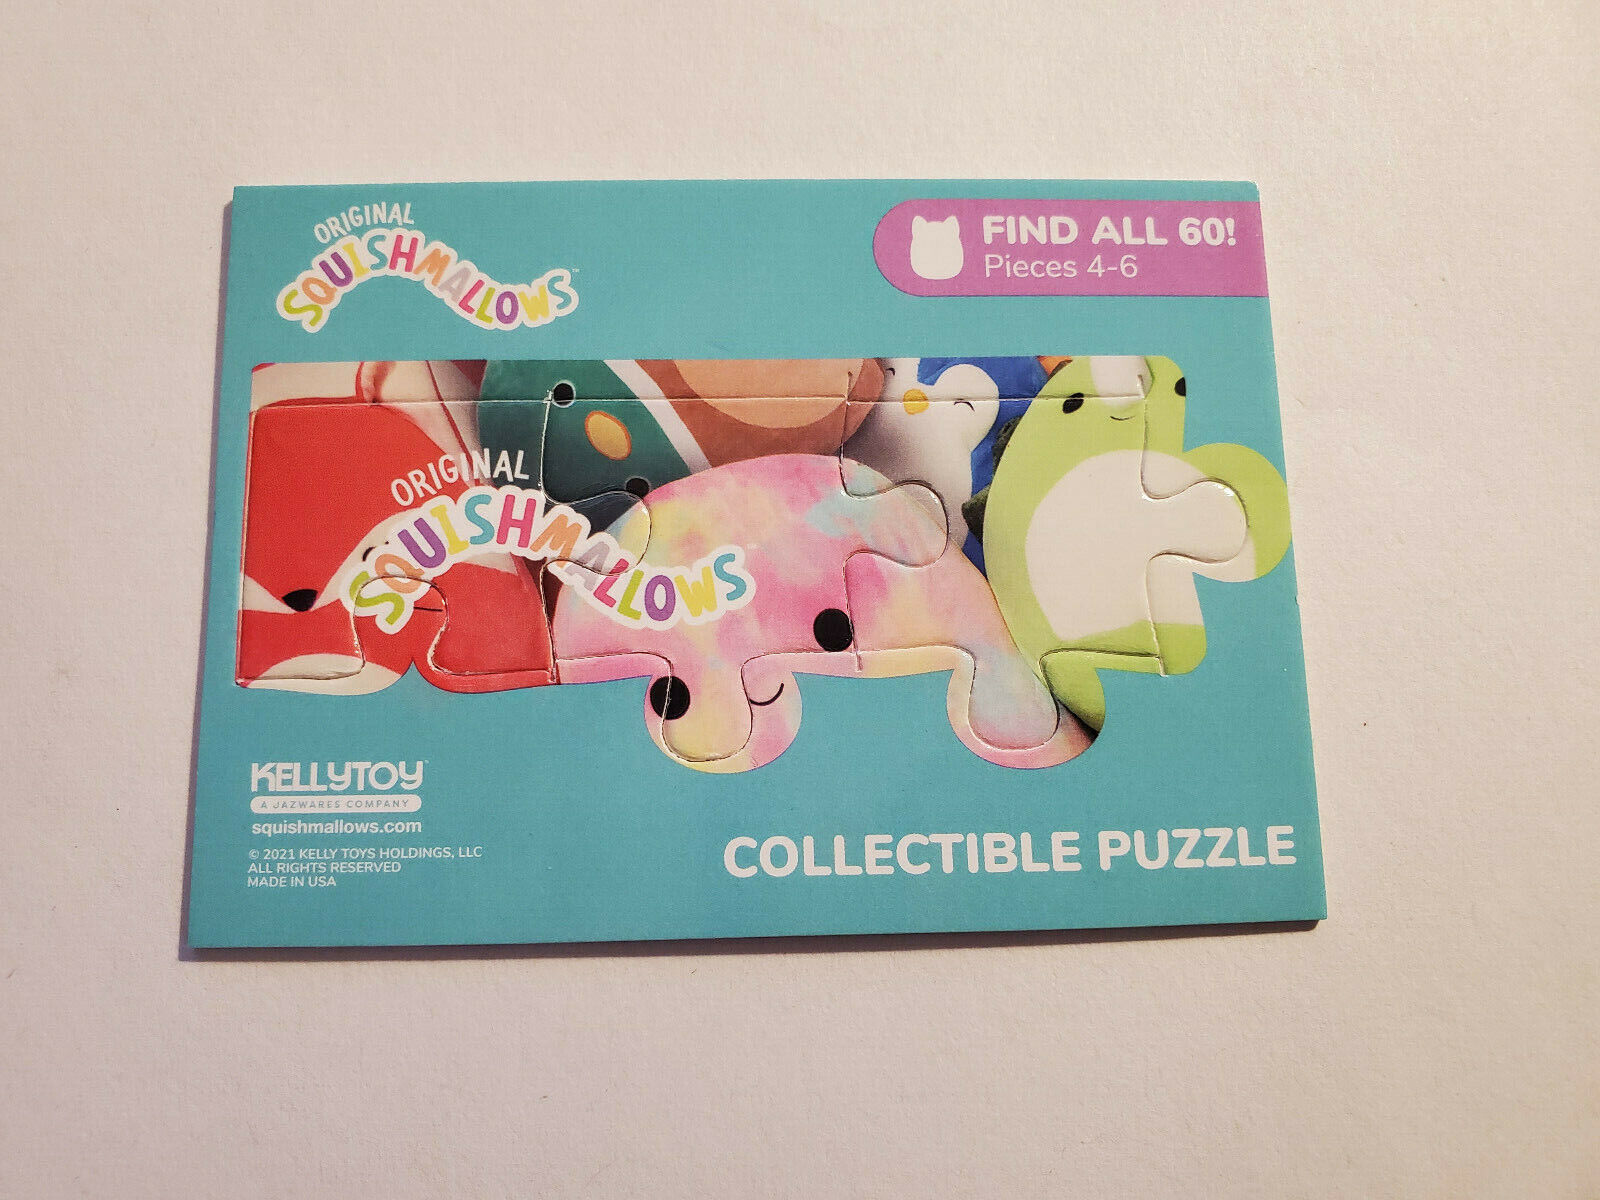 Squishmallow Cards Series 1 Puzzle Pieces You Choose Updated 6/10 Restocked